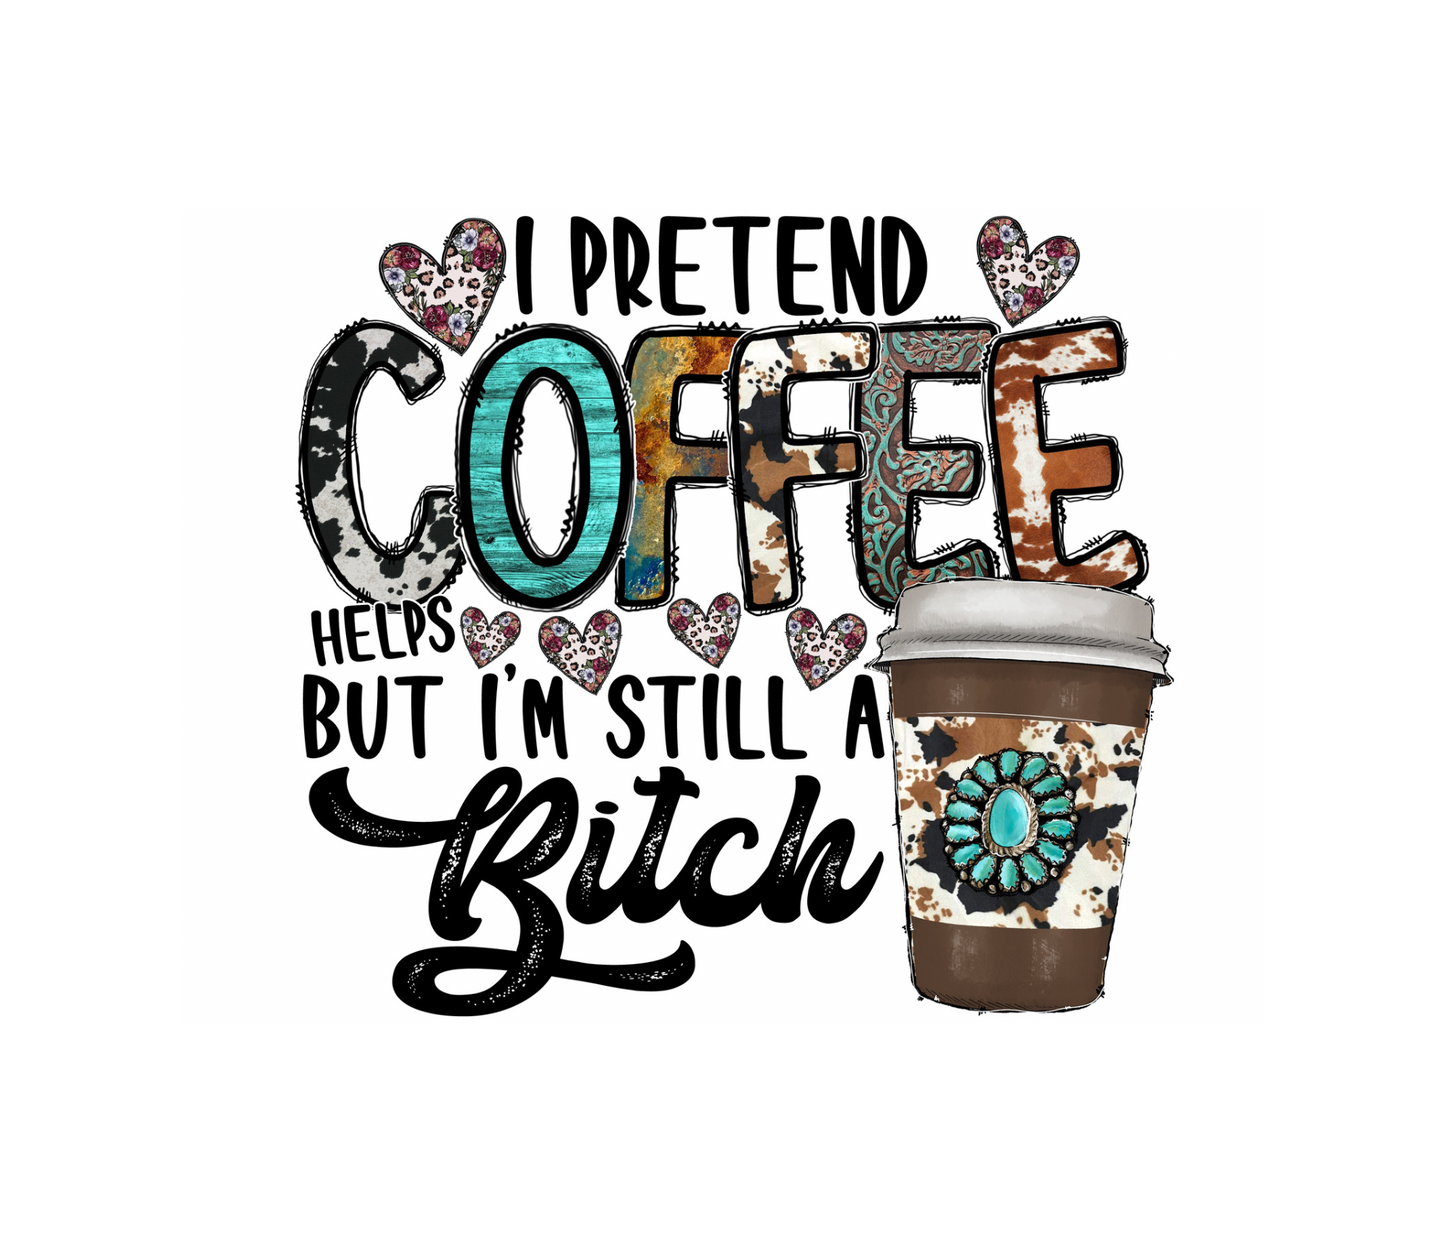 I PRETEND COFFEE HELPS DESIGN! YOU CHOOSE COLOR AND STYLE! TEE OR CREWNECK! BLEACHED OR NON-BLEACHED